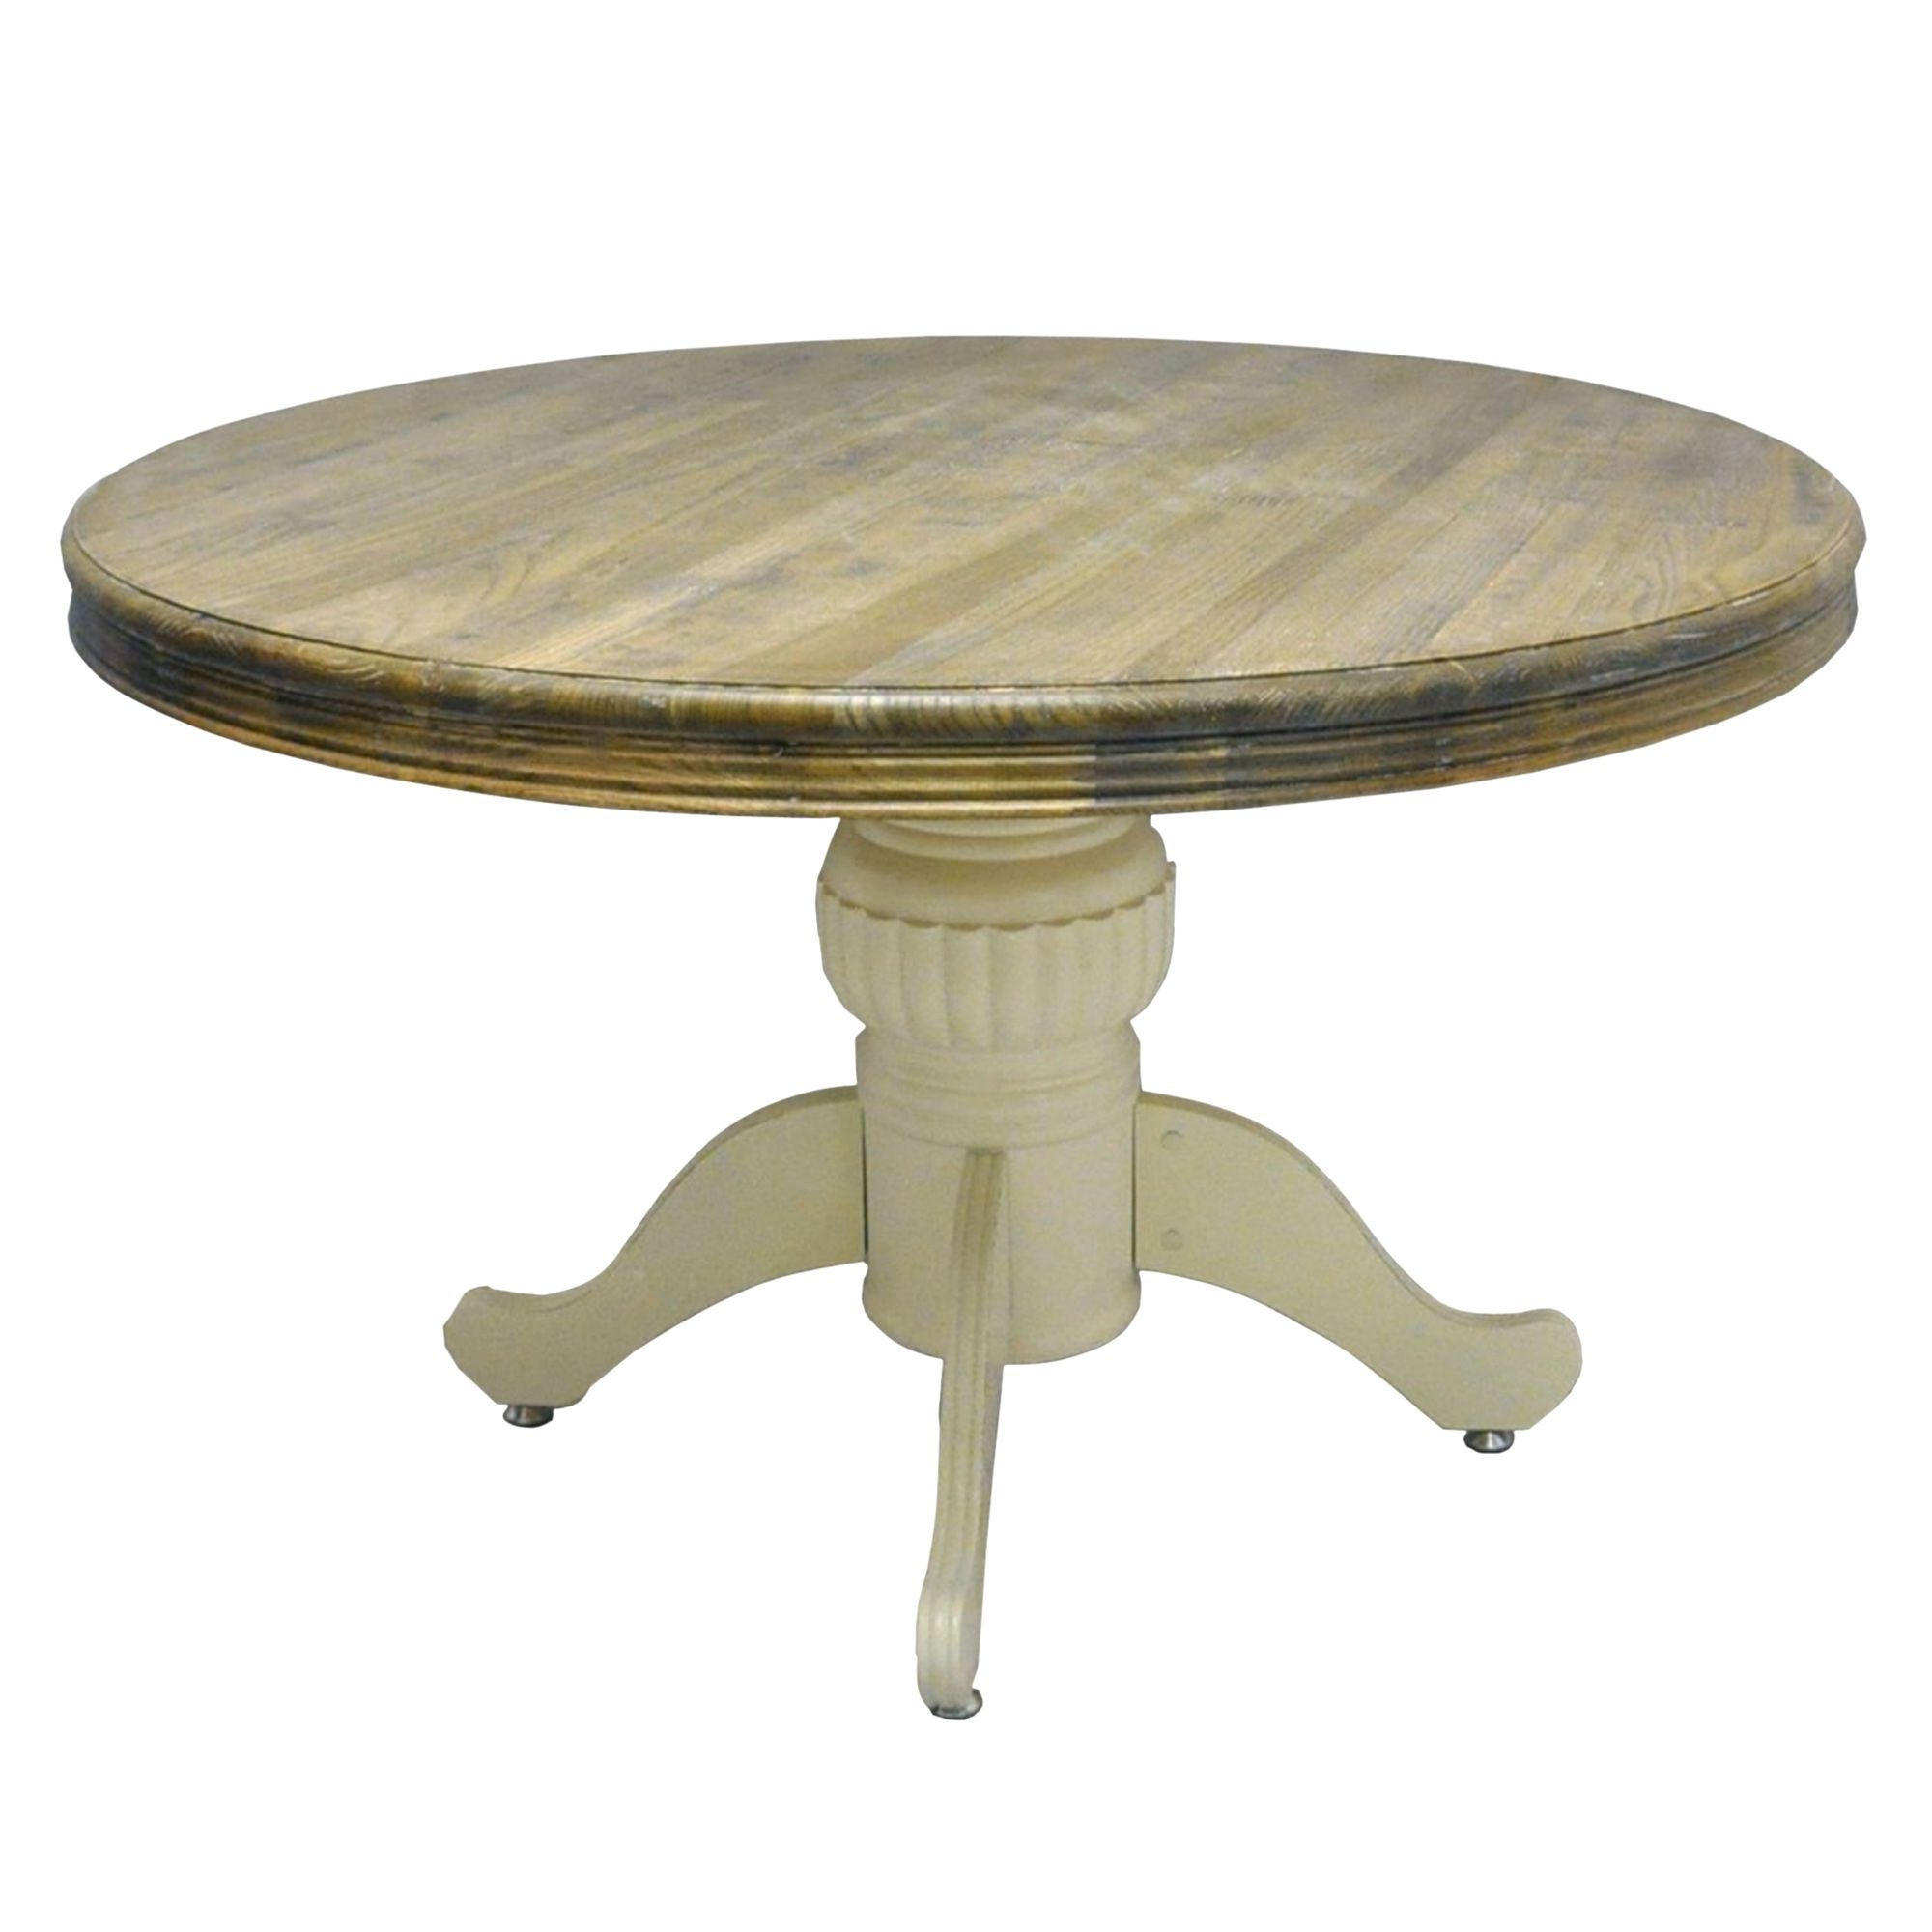 Favorite Antique Cream Round Dining Table Throughout Vintage Brown Round Dining Tables (View 16 of 20)